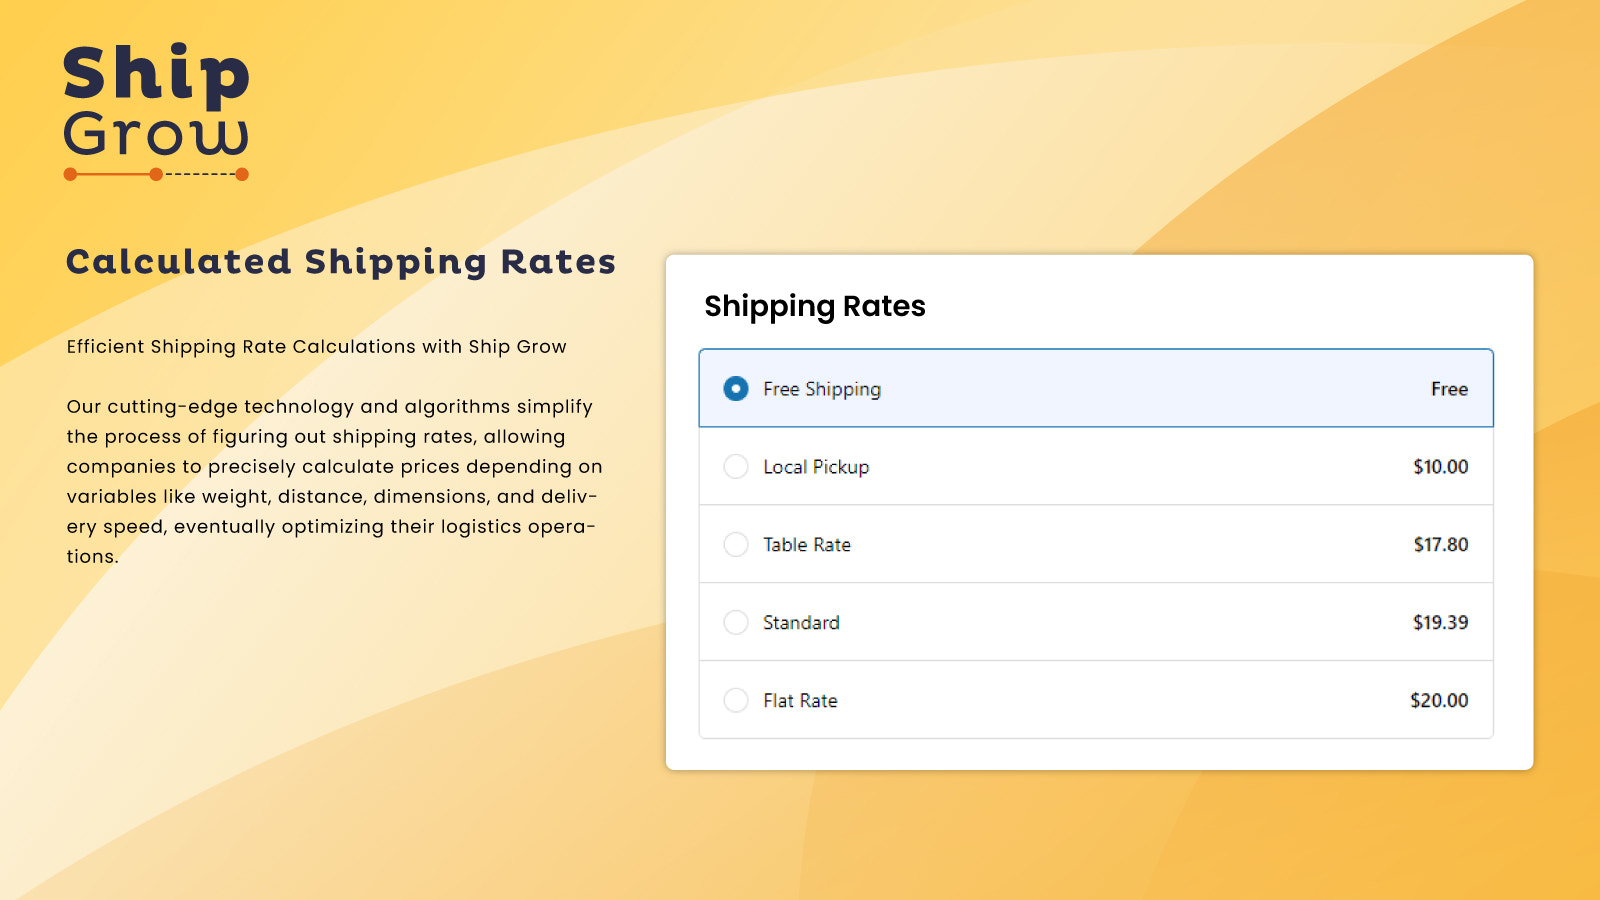 Calculated Shipping Rates